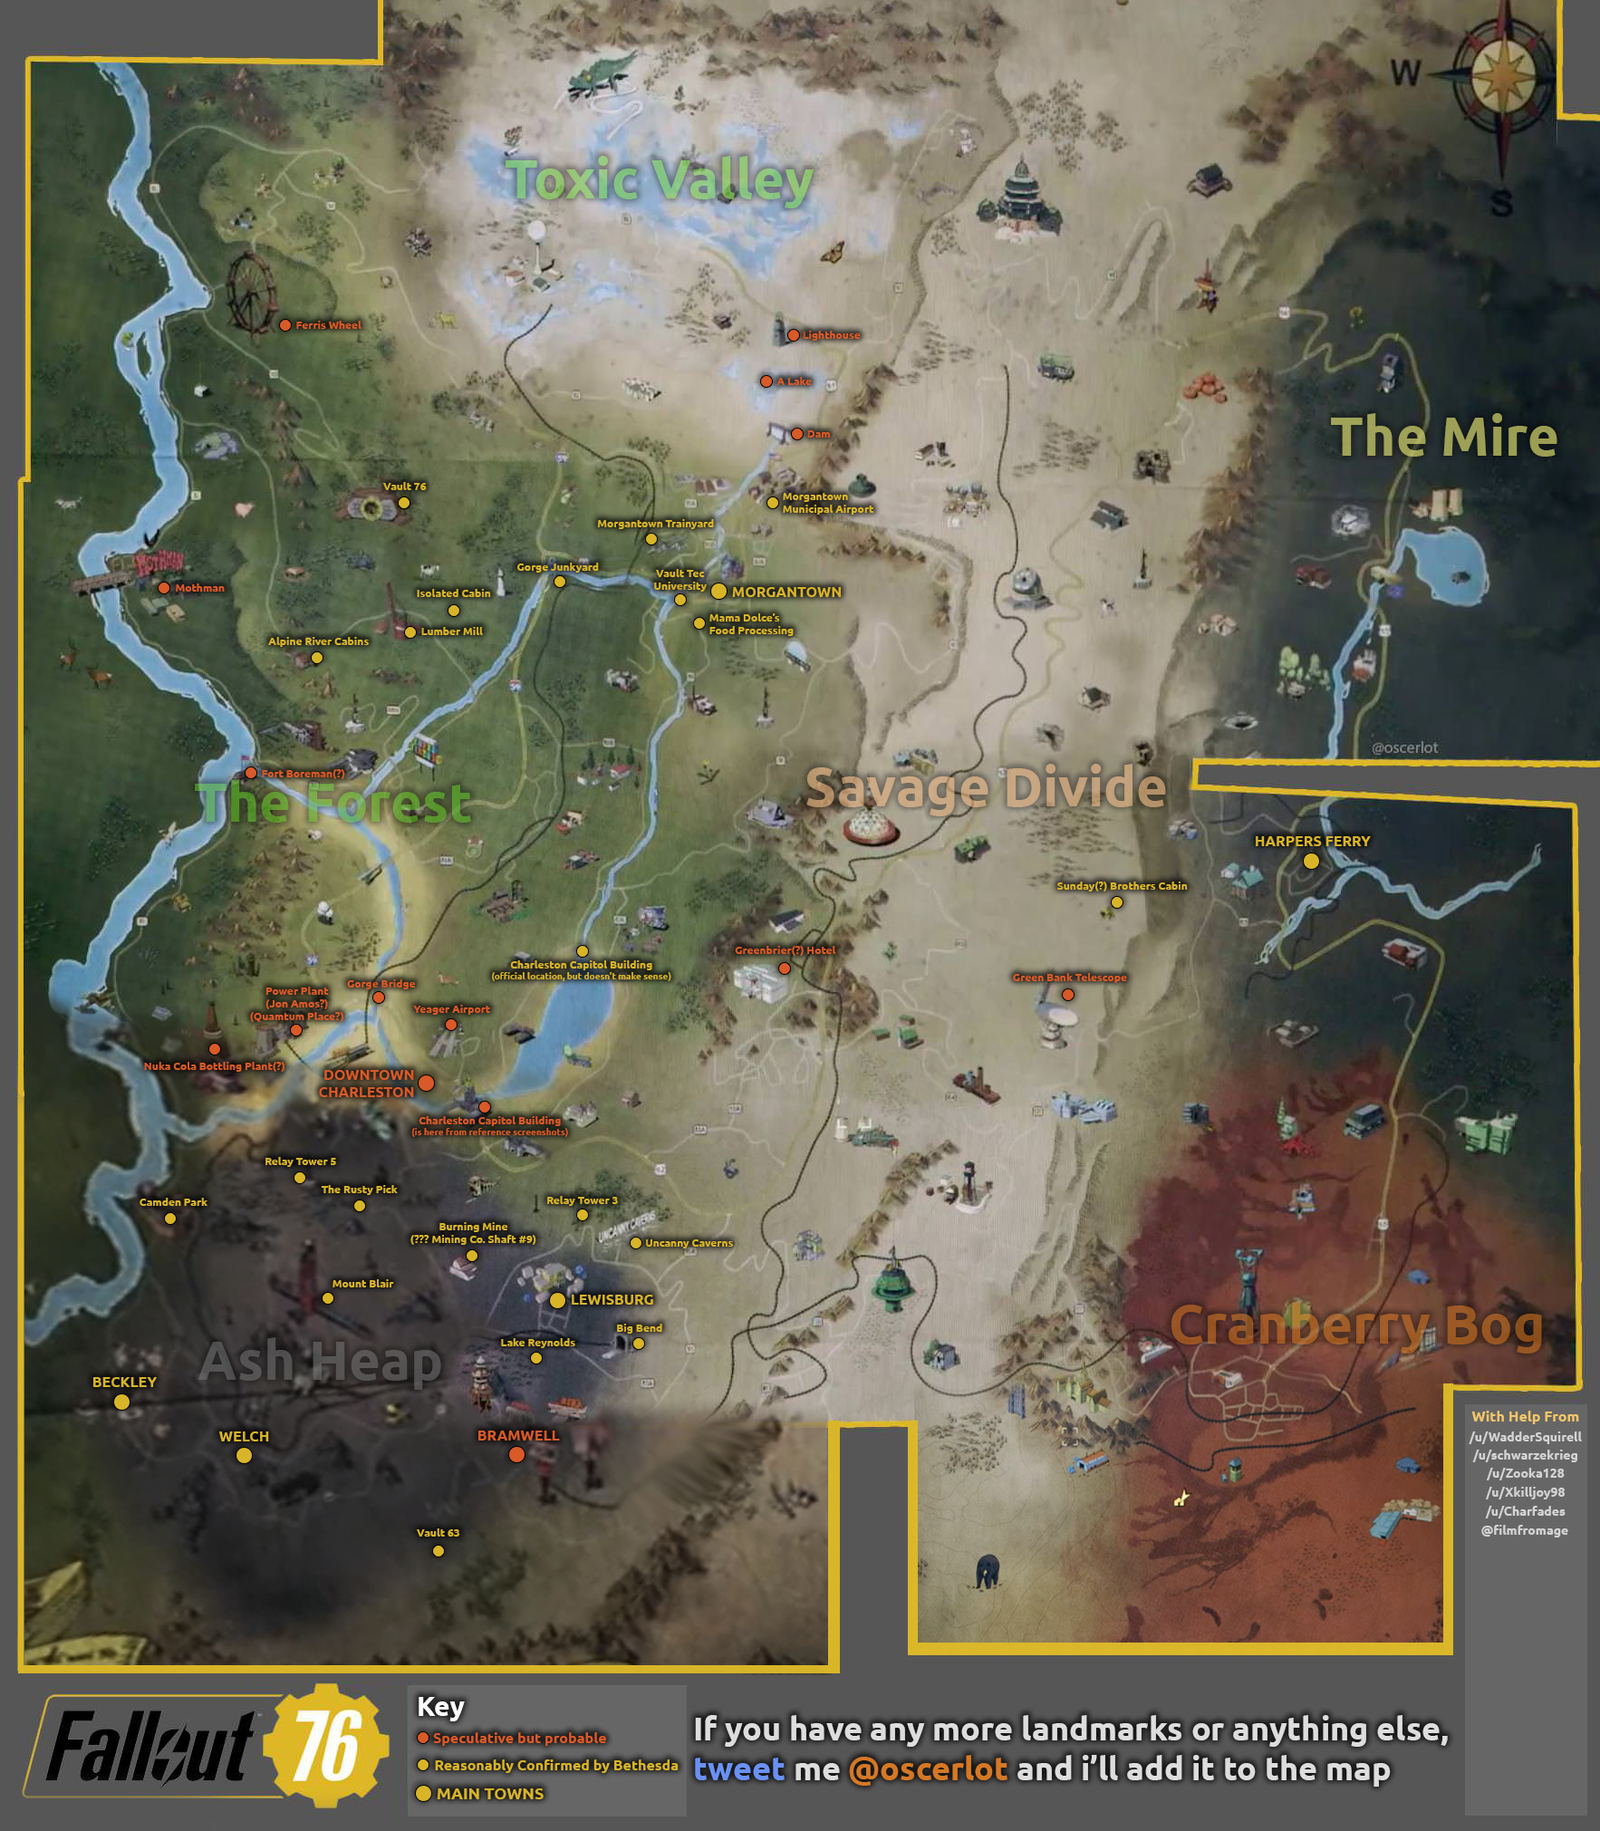 Fallout 76 map variant leaked online - Fallout, Bethesda, Fallout 76, Reddit, Computer games, Analysis